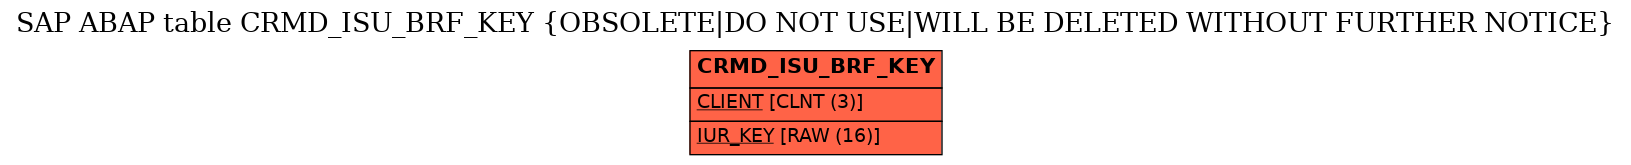 E-R Diagram for table CRMD_ISU_BRF_KEY (OBSOLETE|DO NOT USE|WILL BE DELETED WITHOUT FURTHER NOTICE)